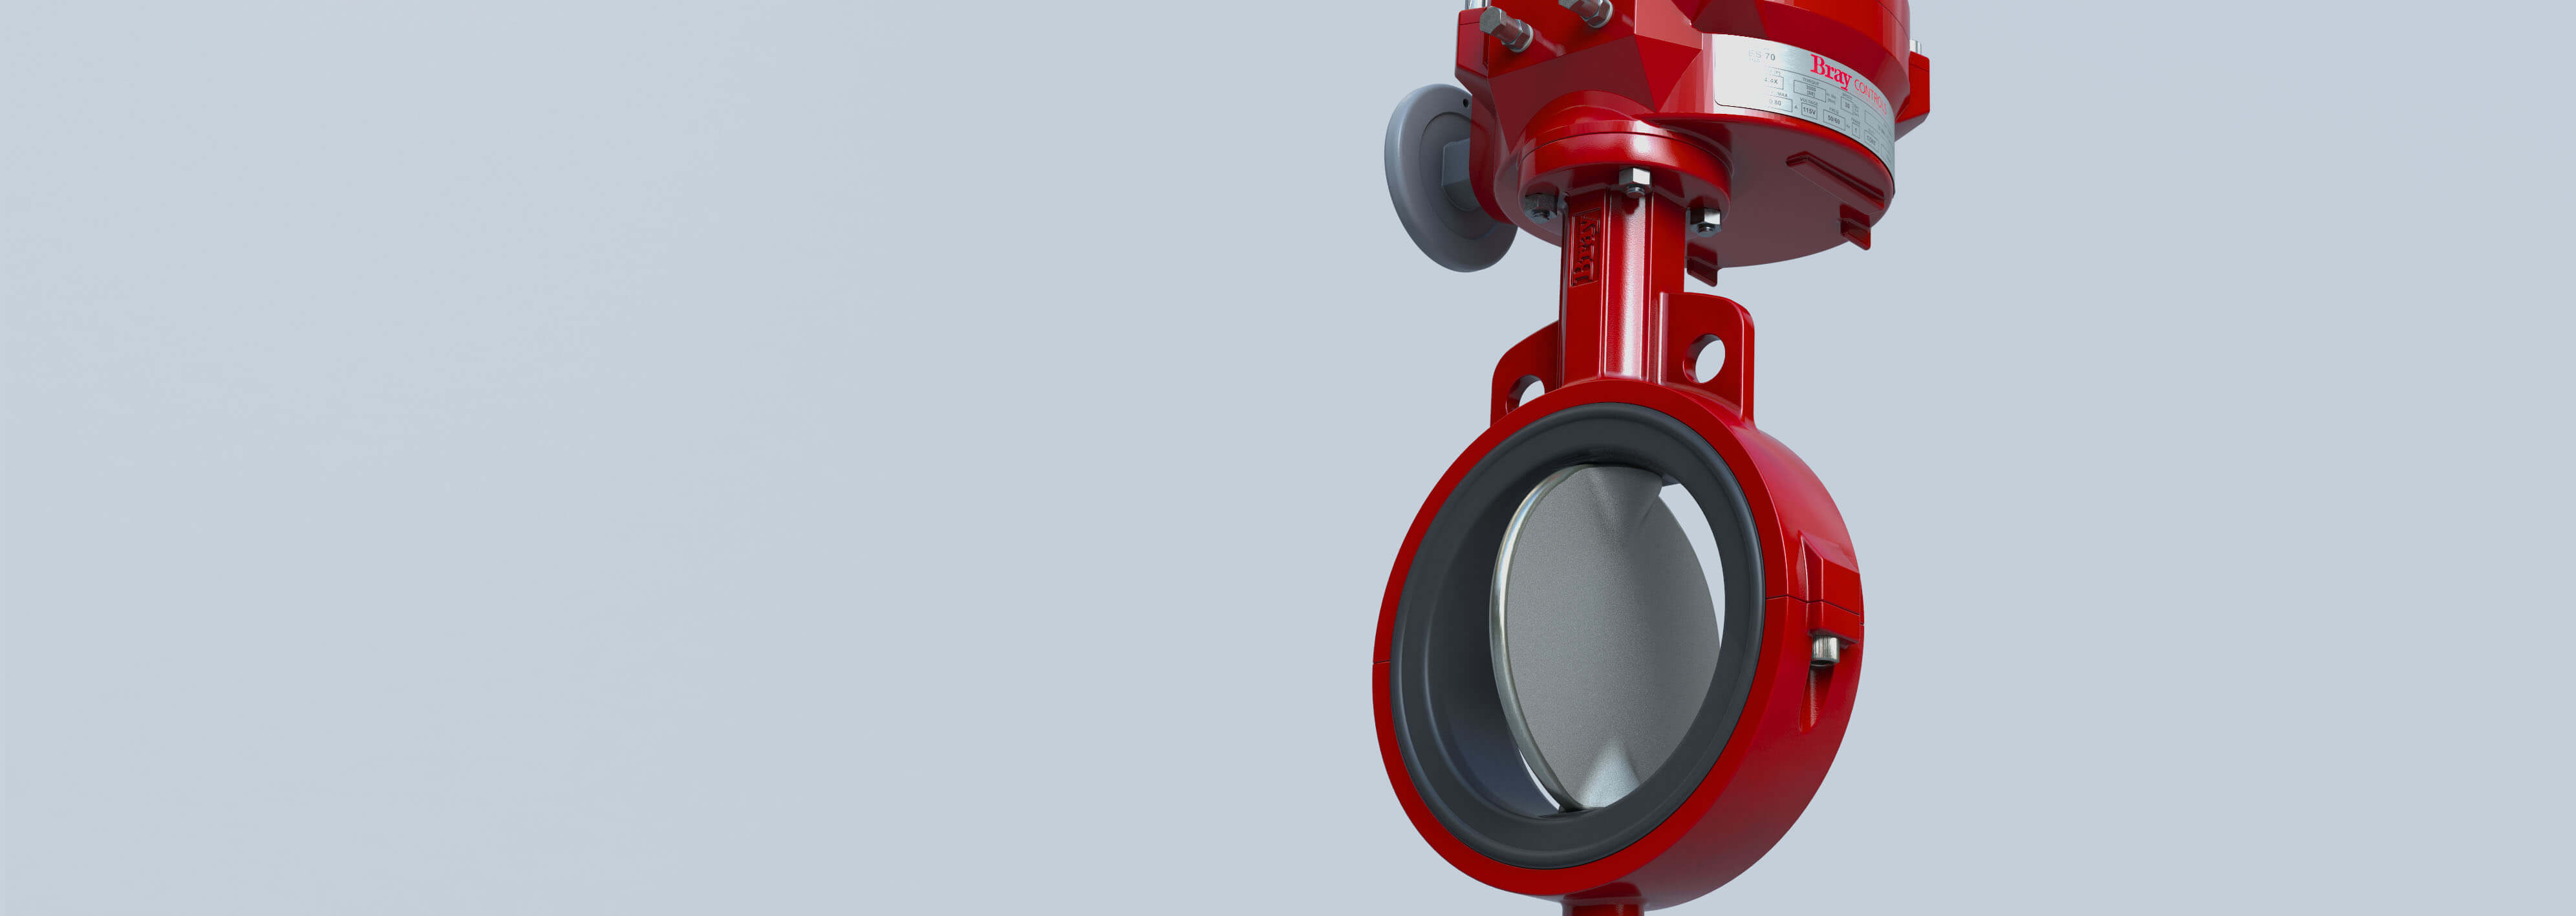 Resilient Seated Butterfly Valve Series 2021 Bray International